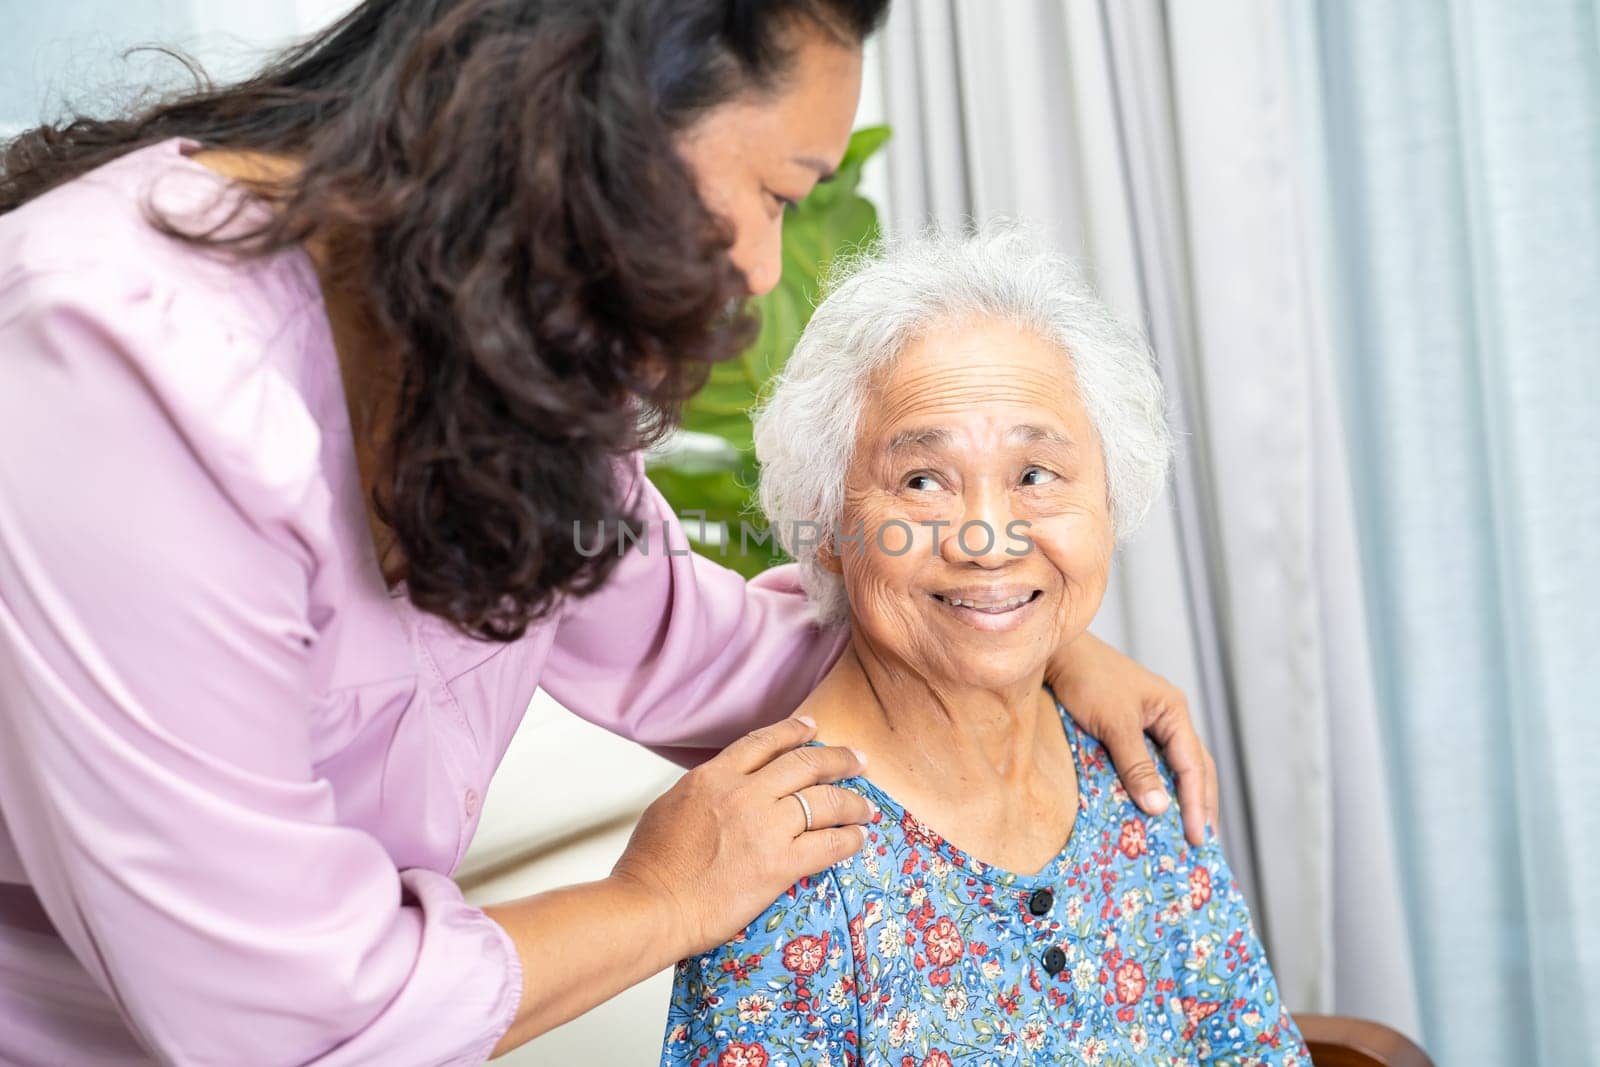 Caregiver help and support Asian senior woman with love and care in home.